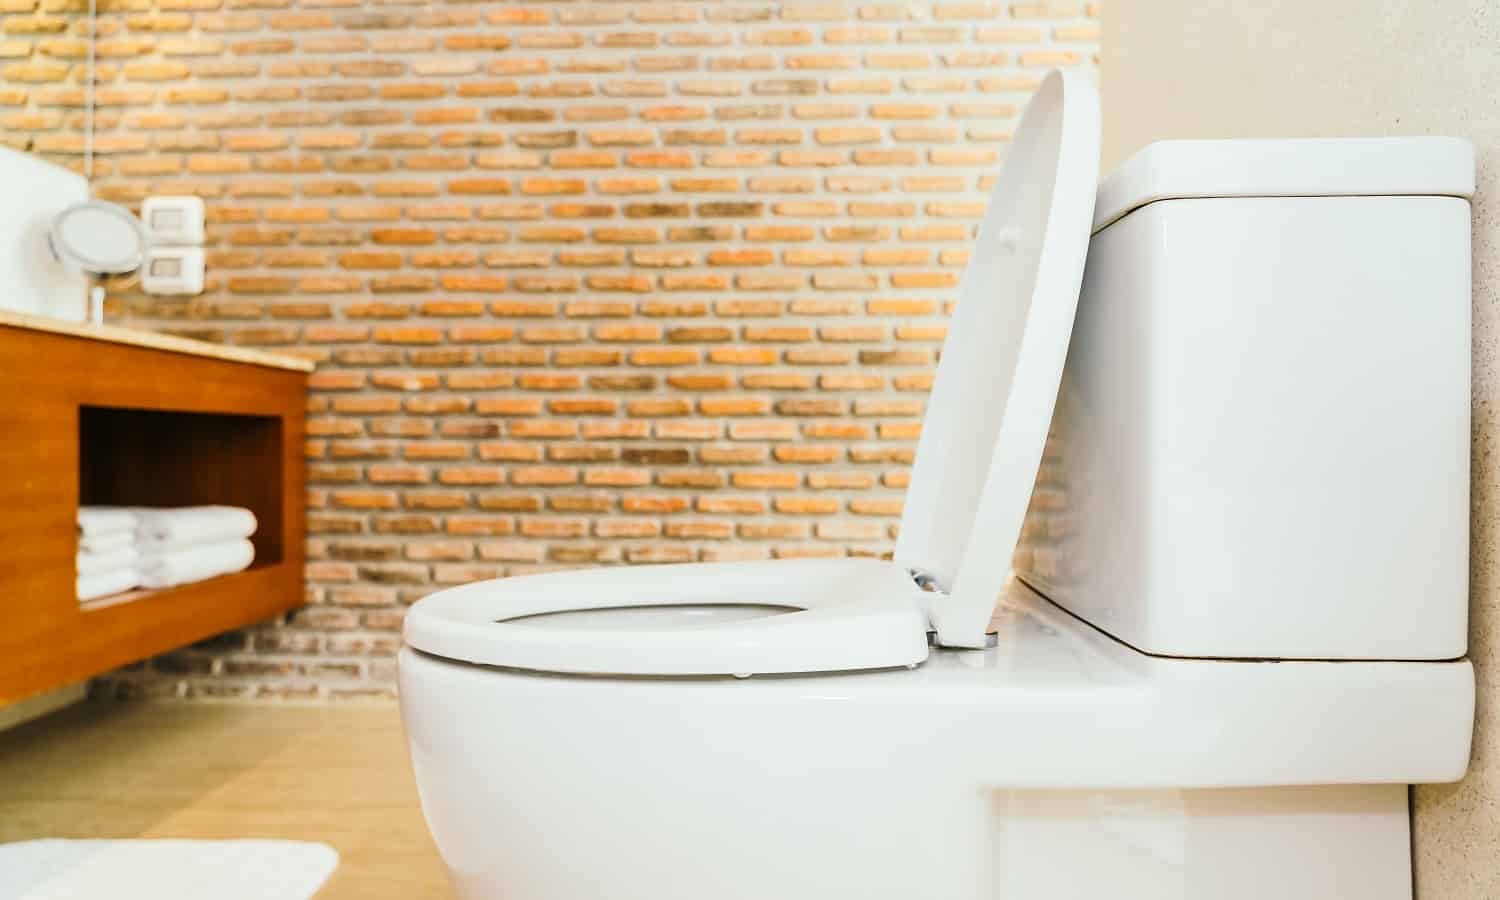 15 Best Soft Close Toilet Seat For 2023 1690850947 